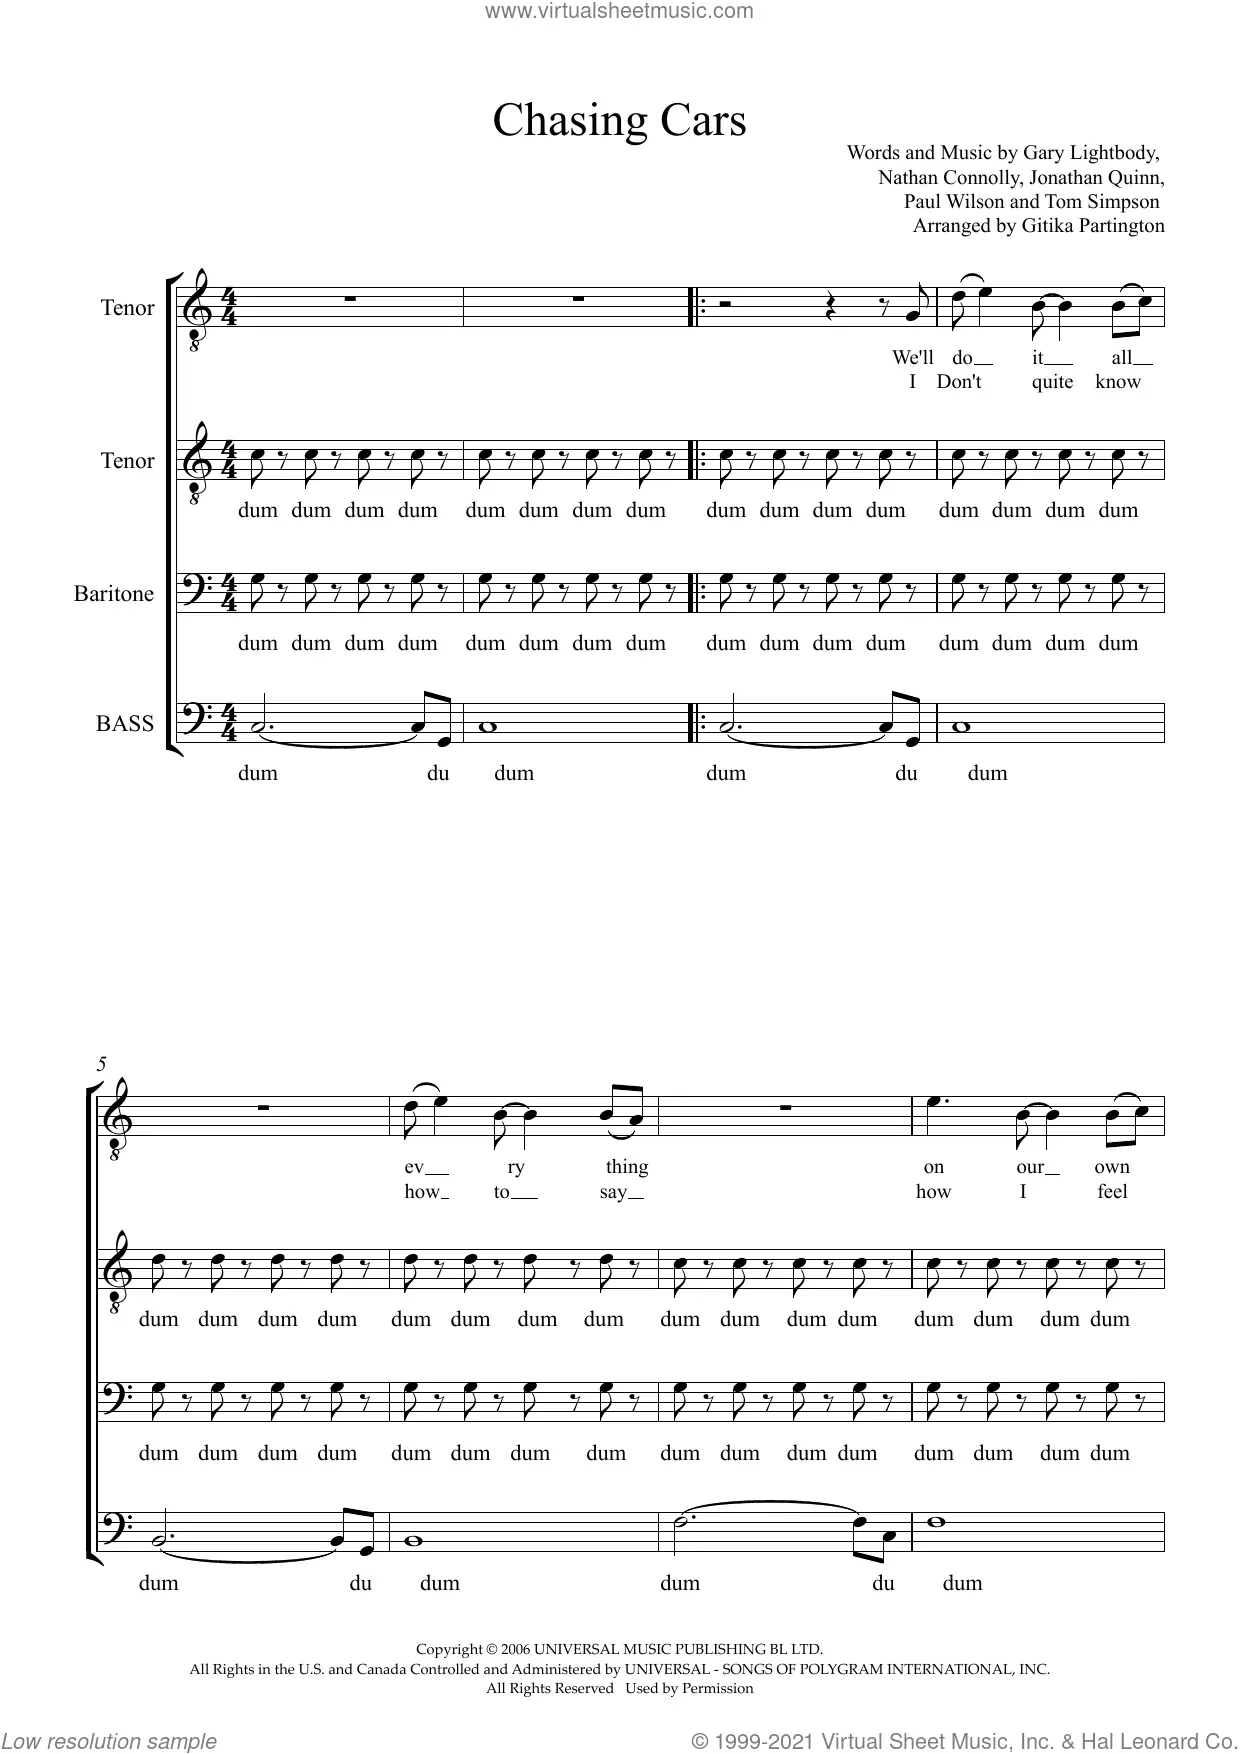 Snow Patrol Sheet Music to download and print